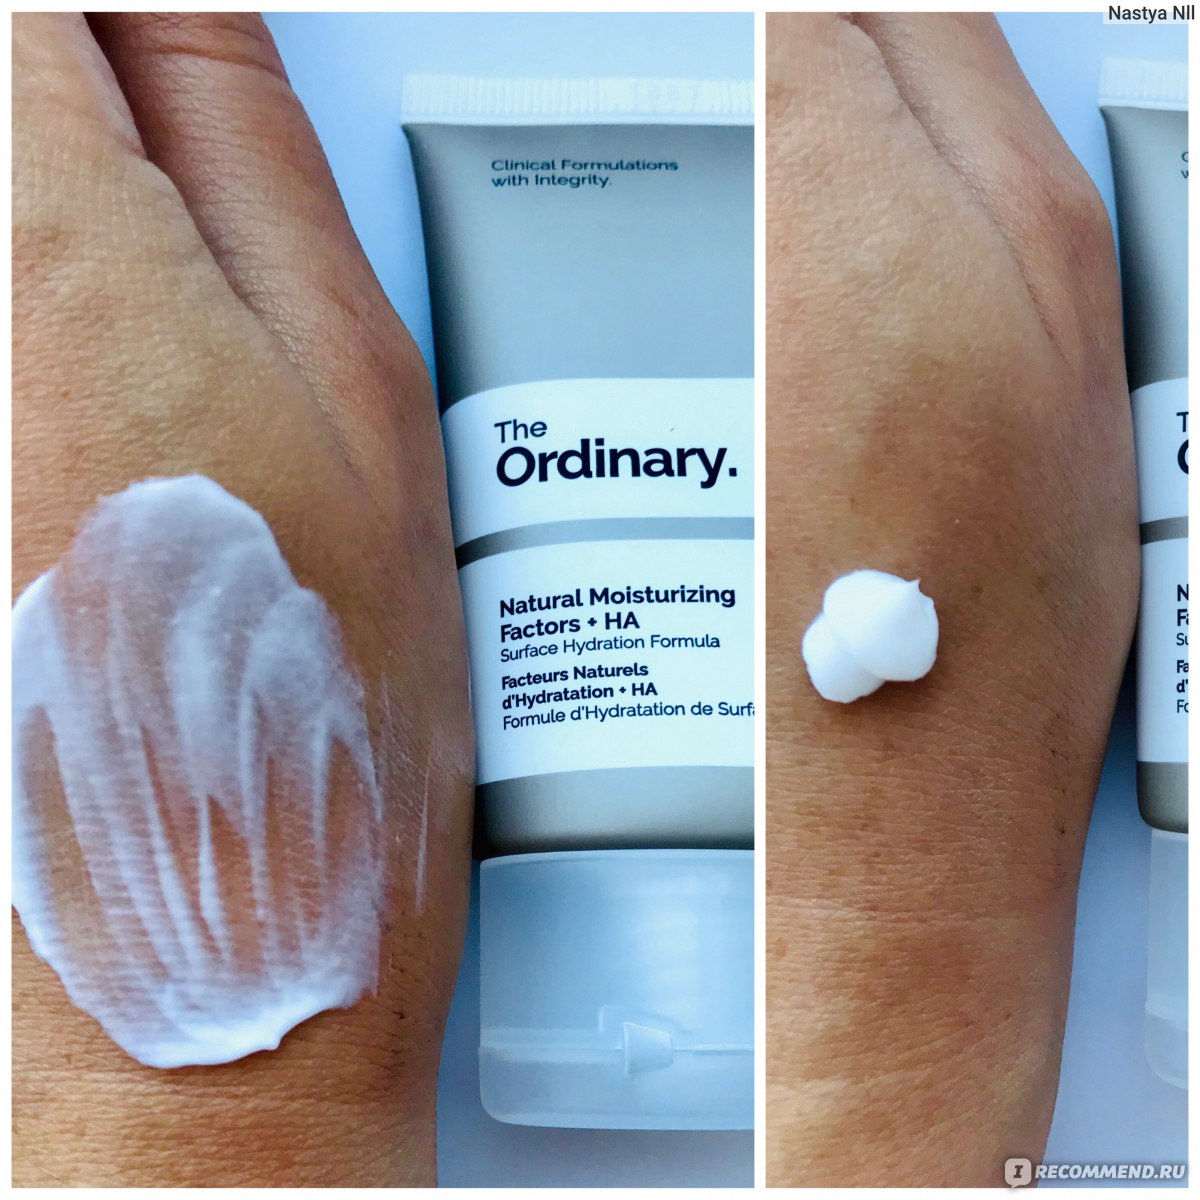 The ordinary natural. The ordinary крем для лица. The ordinary natural Moisturizing Factors. The ordinary the ordinary natural Moisturizing Factors + ha. The ordinary natural Moisturizing Sunscreen.